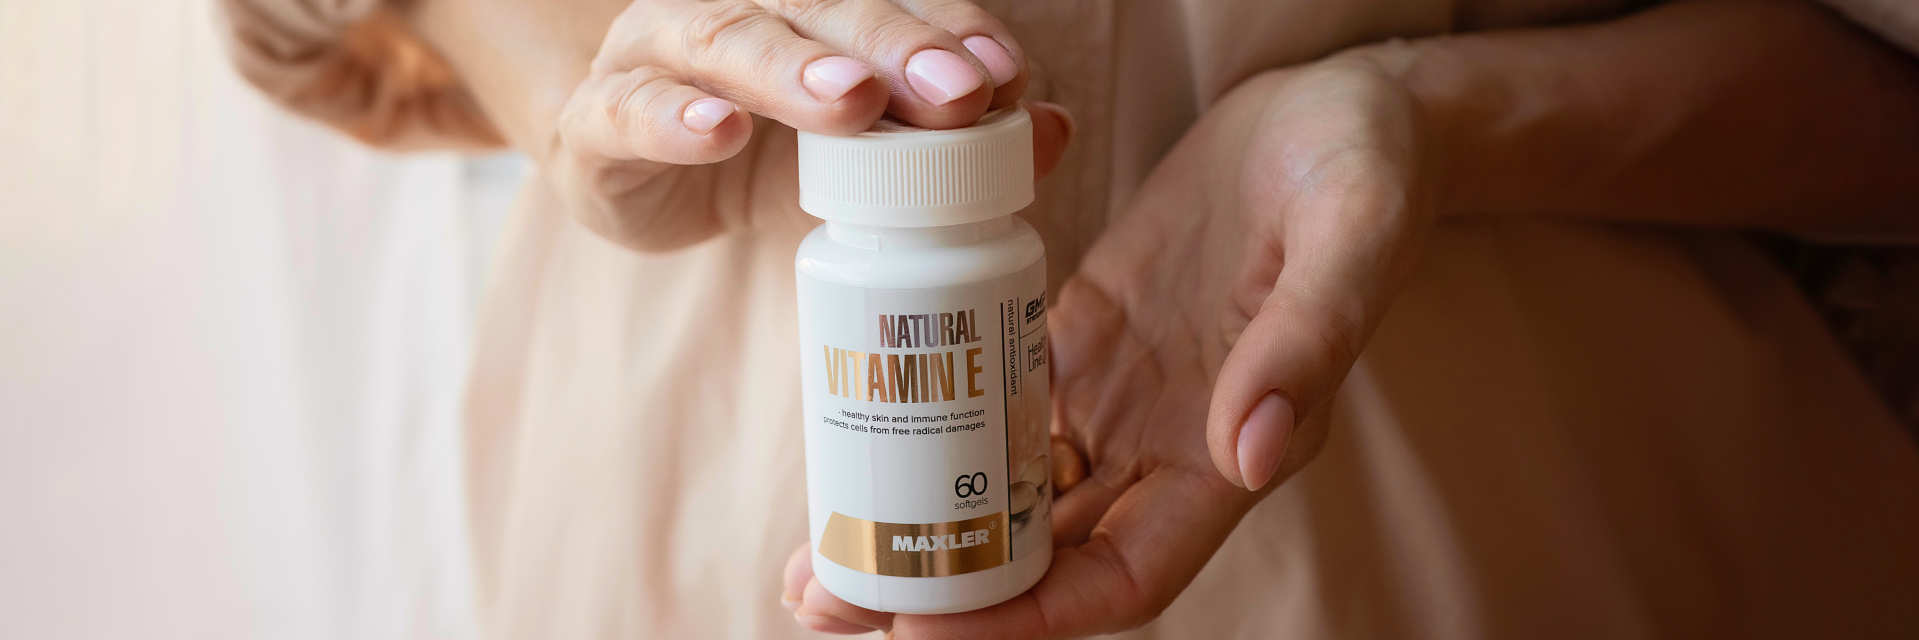 Woman's hand holding a bottle of Natural Vitamin E